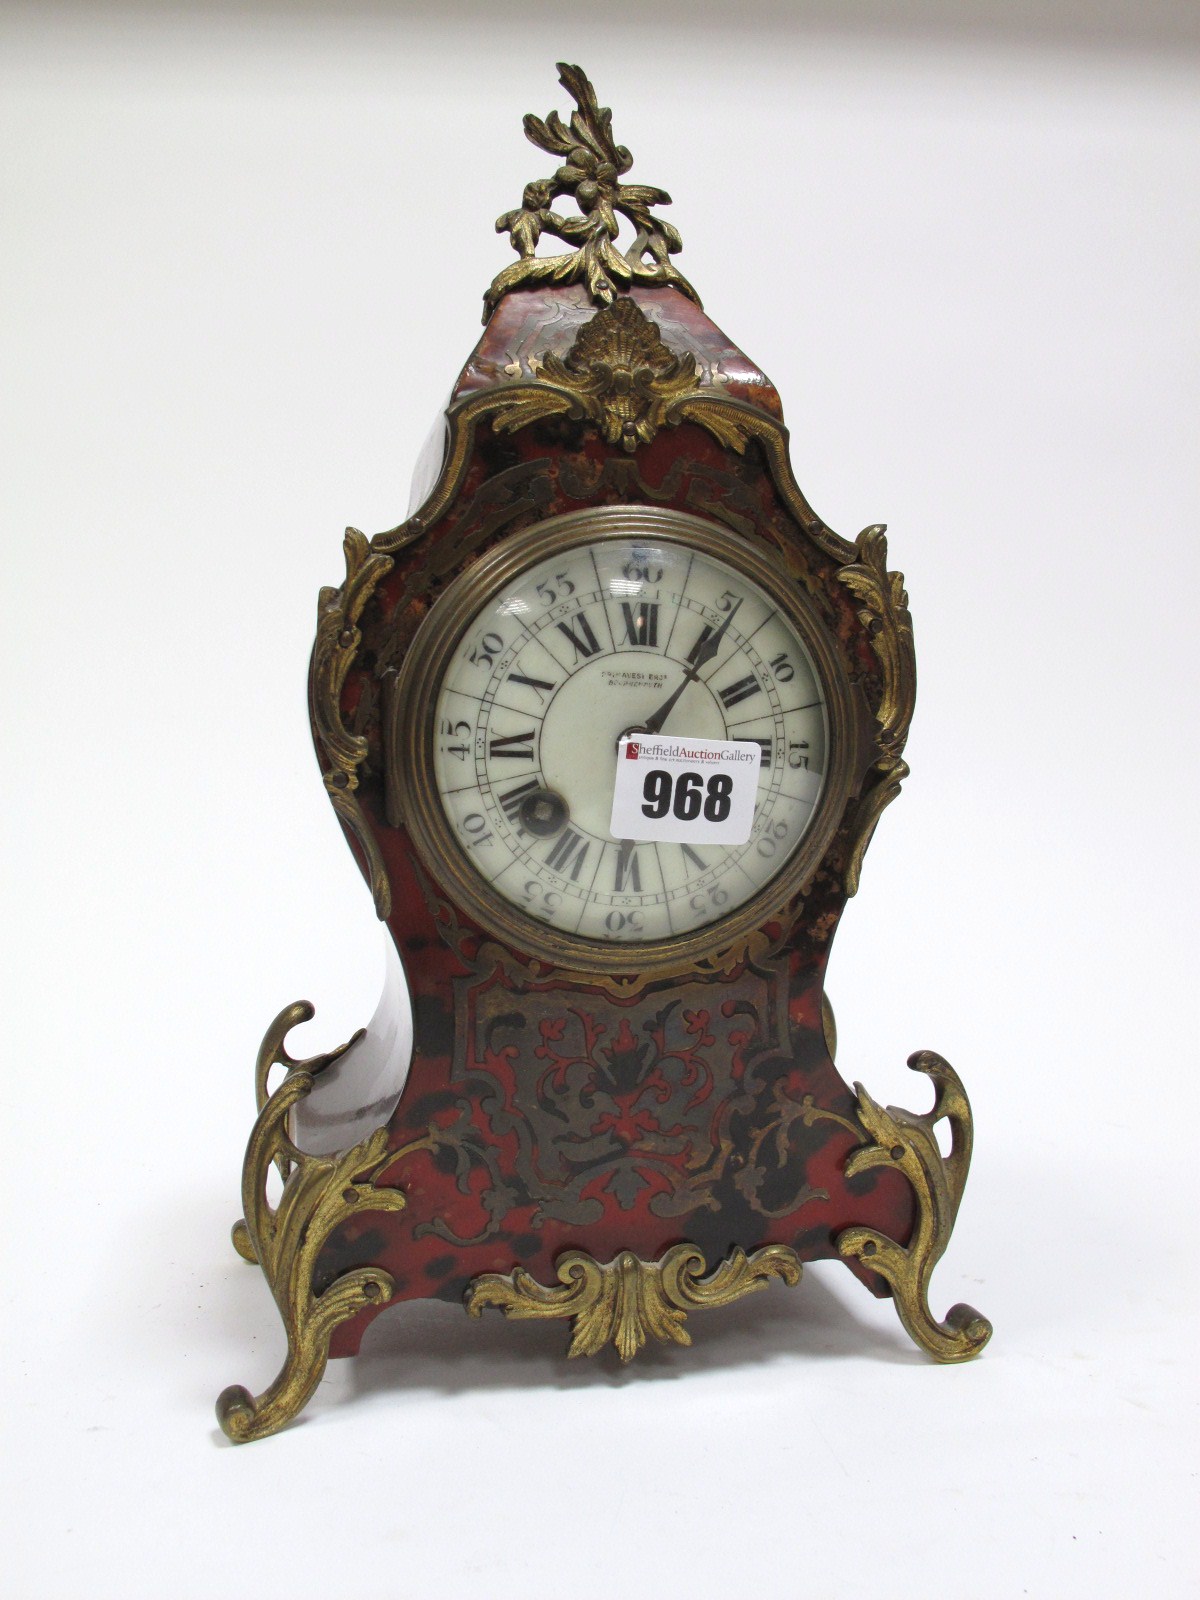 An Early XX Century French Mantel Clock, the brass cylinder movement striking on a gong, with